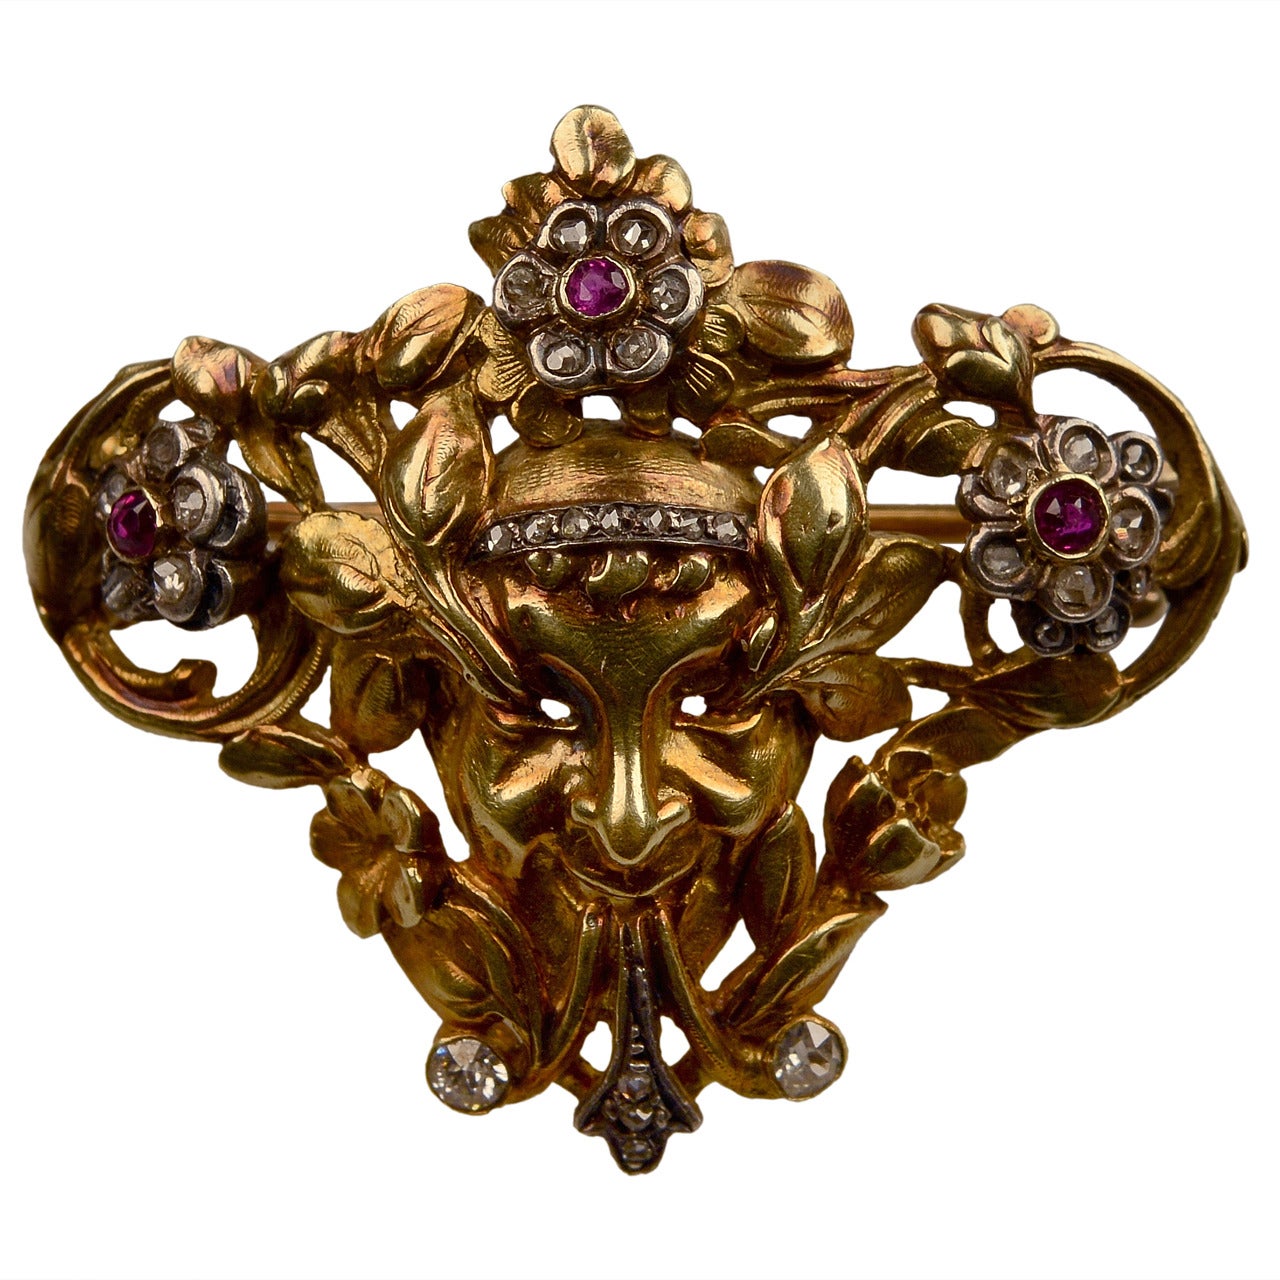 Rare Frederic Boucheron Gold Diamonds and Pink Sapphire Brooch, circa 1880 For Sale